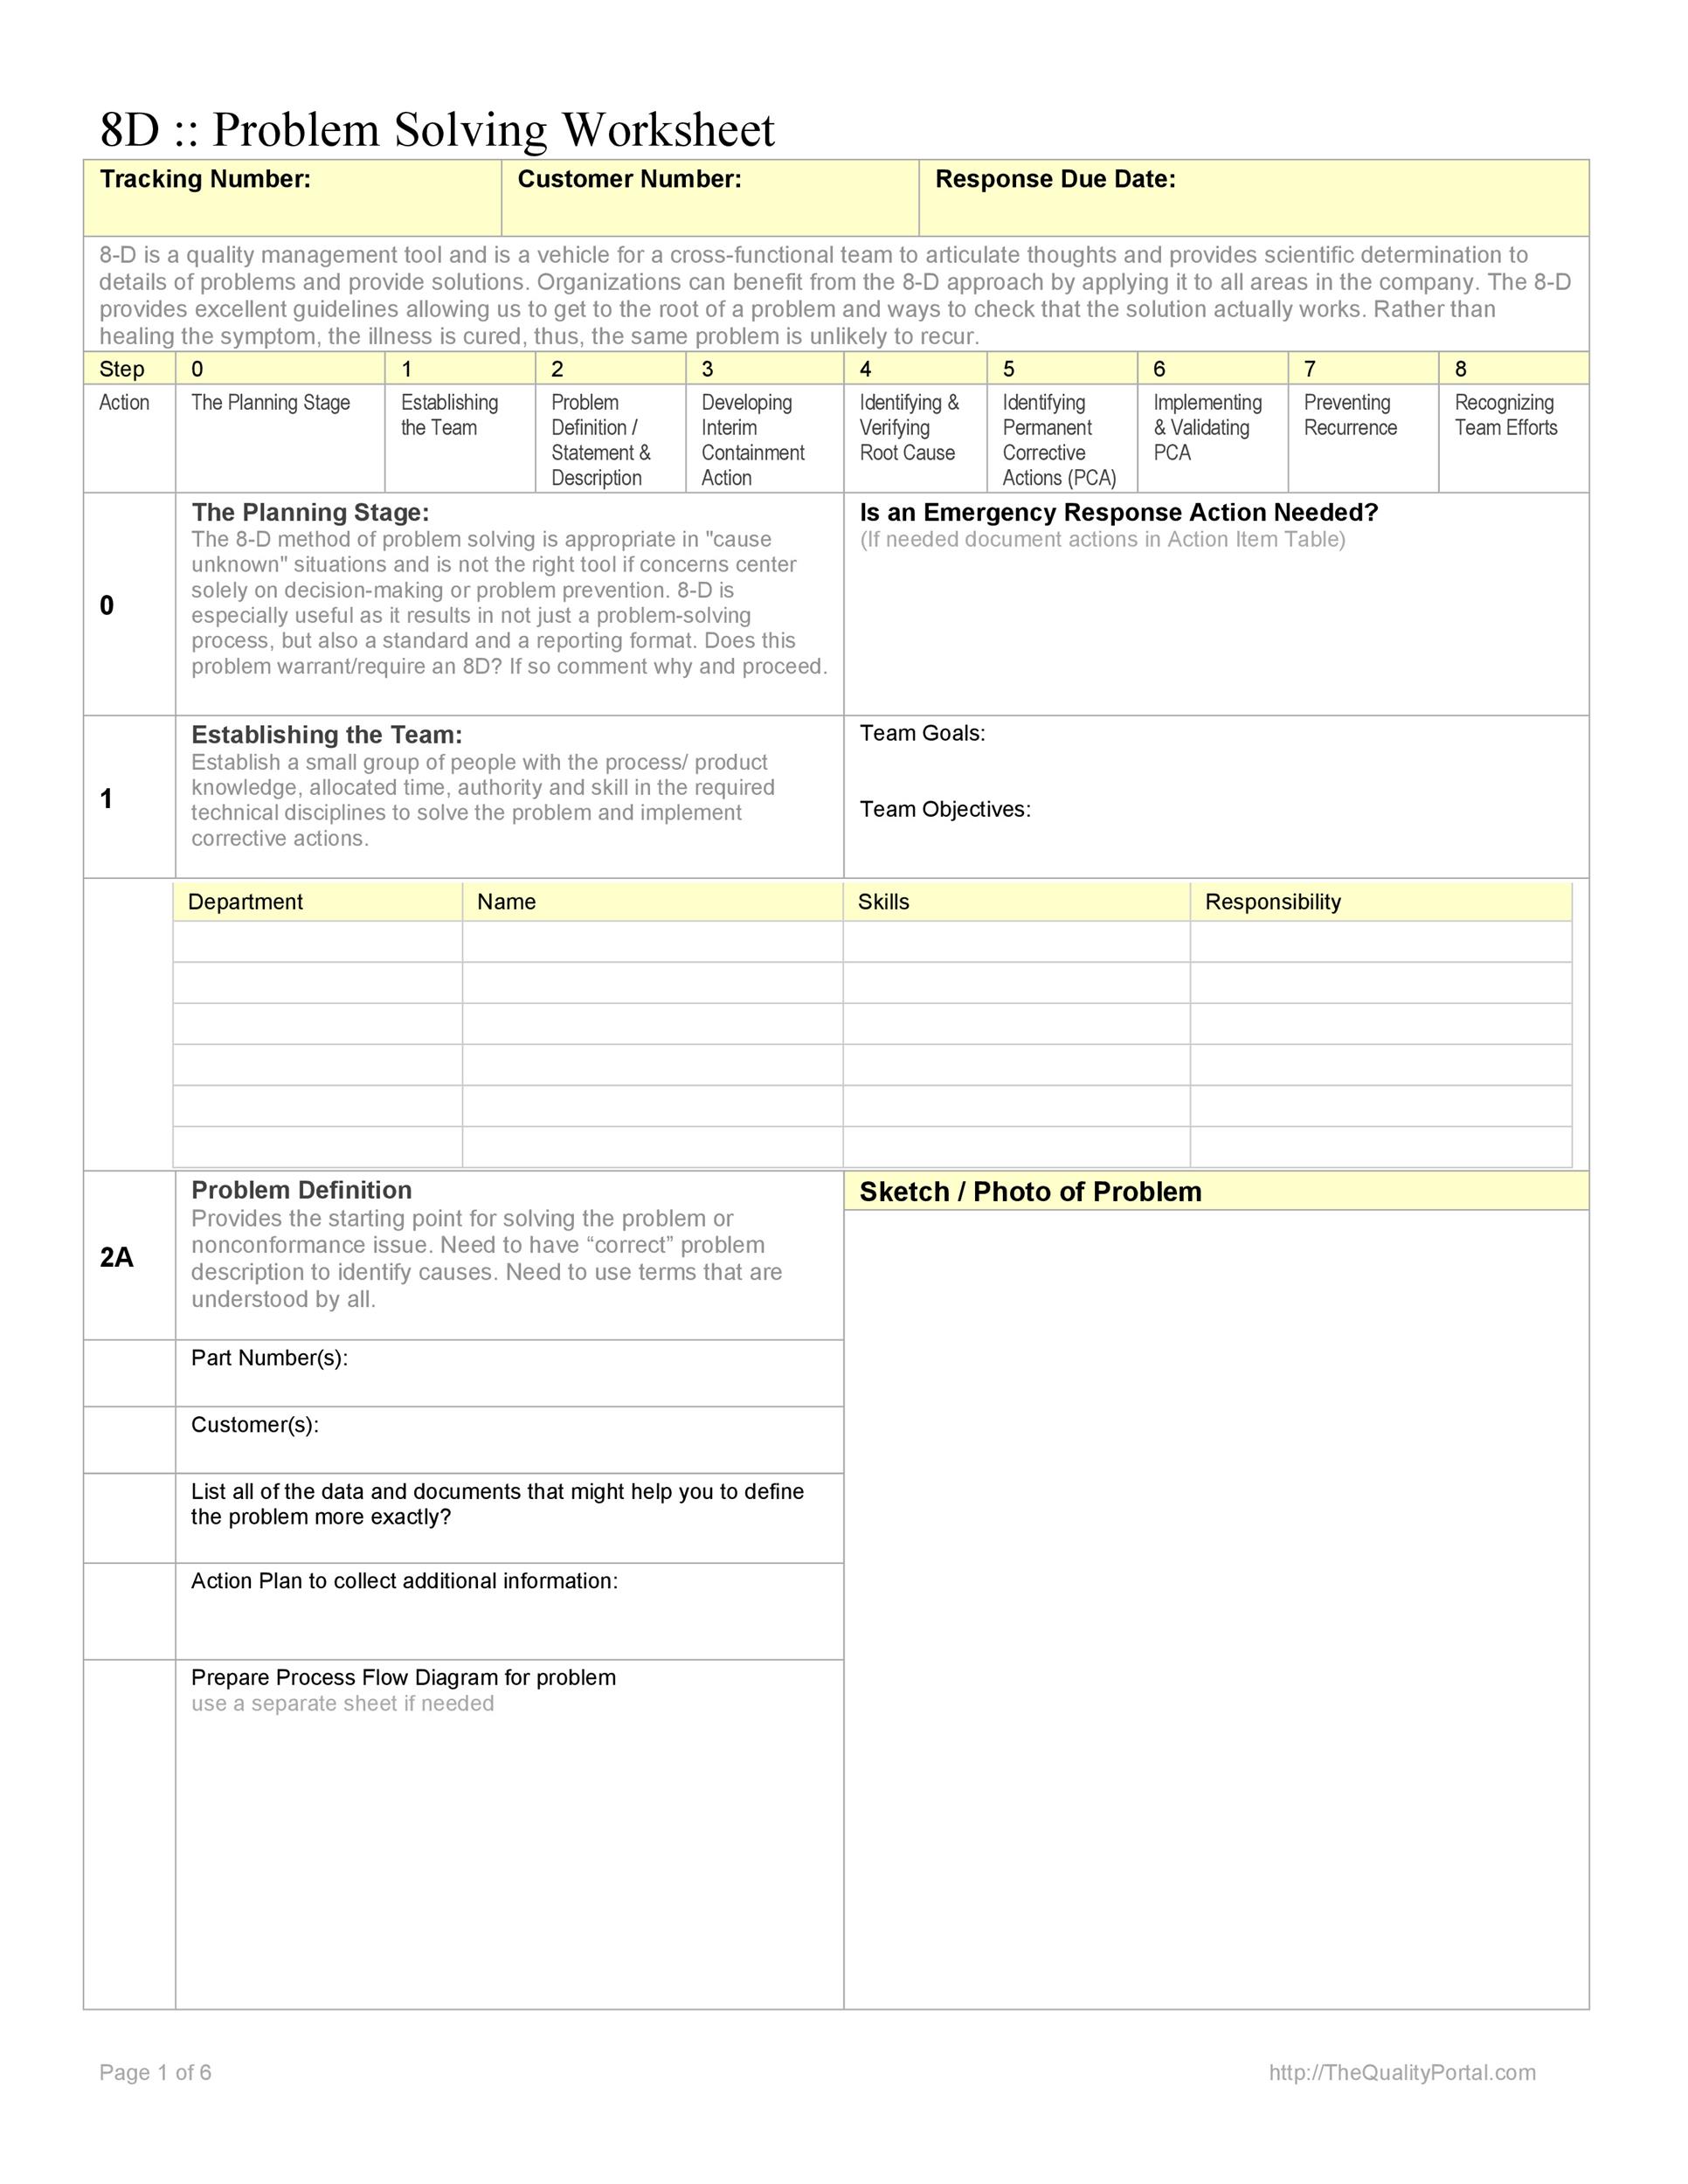 40 Effective Root Cause Analysis Templates, Forms & Examples worksheets for teachers, math worksheets, alphabet worksheets, multiplication, and grade worksheets 8d Problem Solving Worksheet 2 1165 x 900